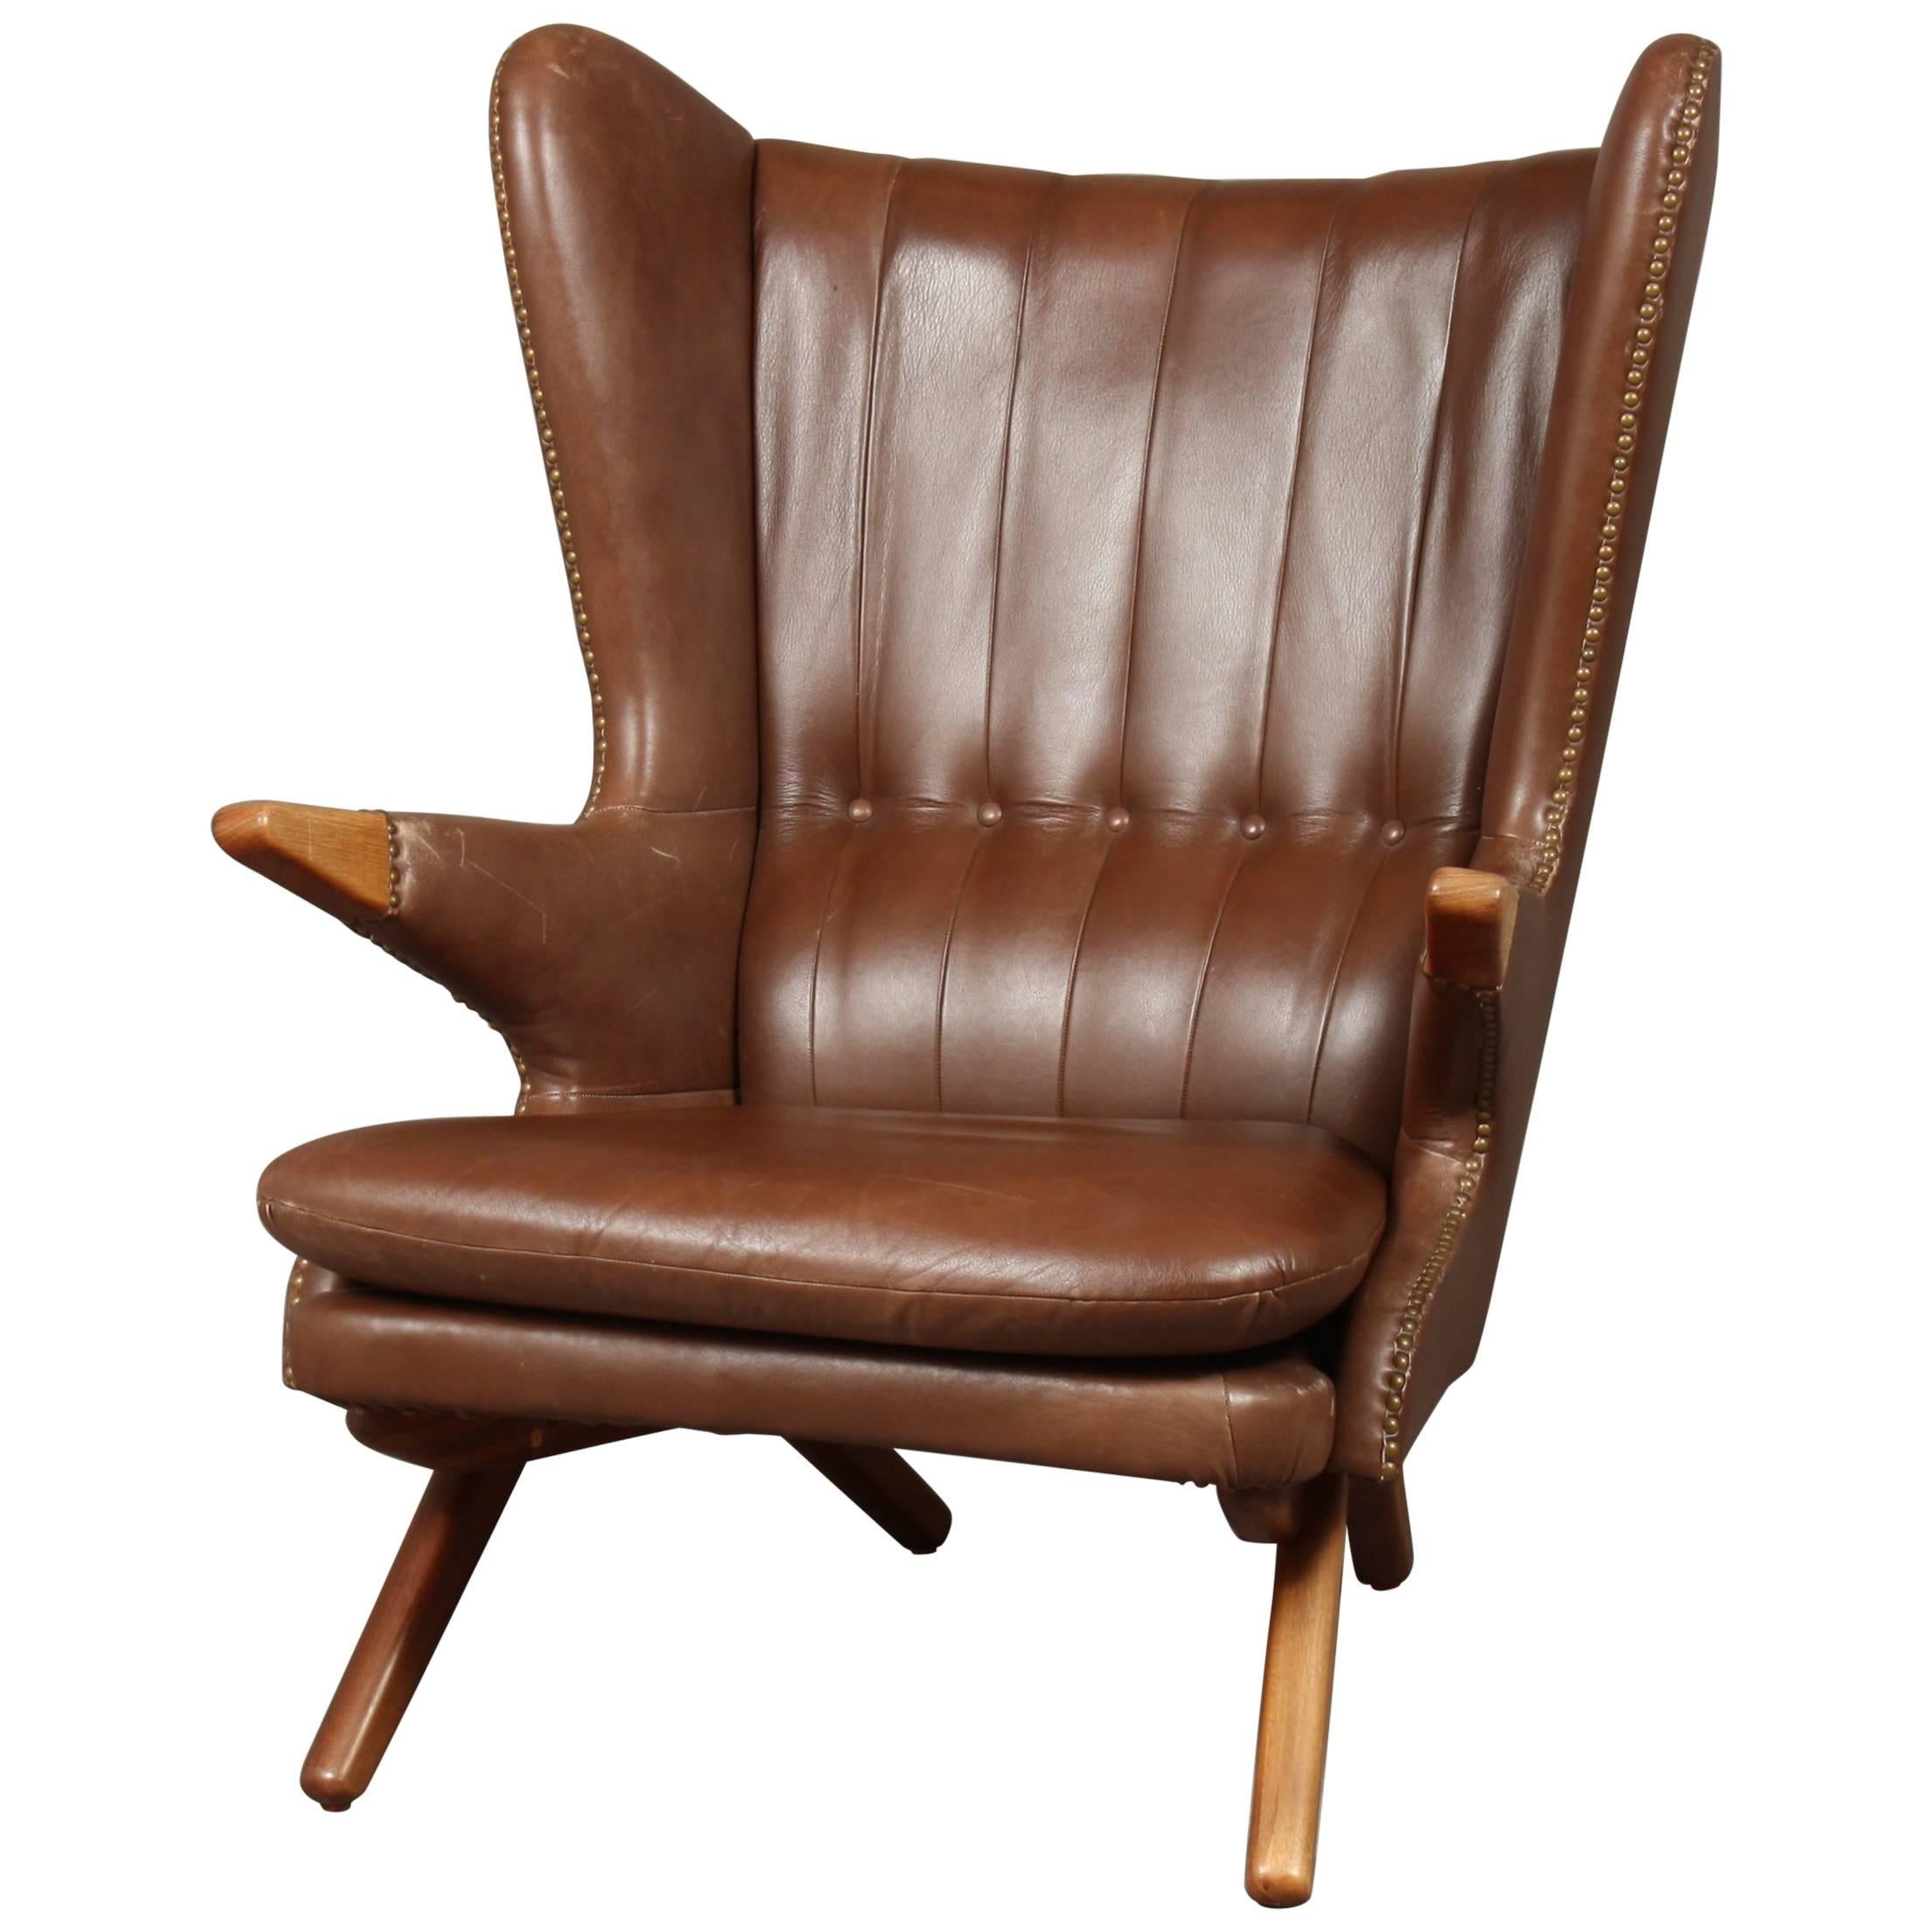 Svend Skipper Model 91 Wing Chair, Brown Leather, Seam Edge, Studded For Sale